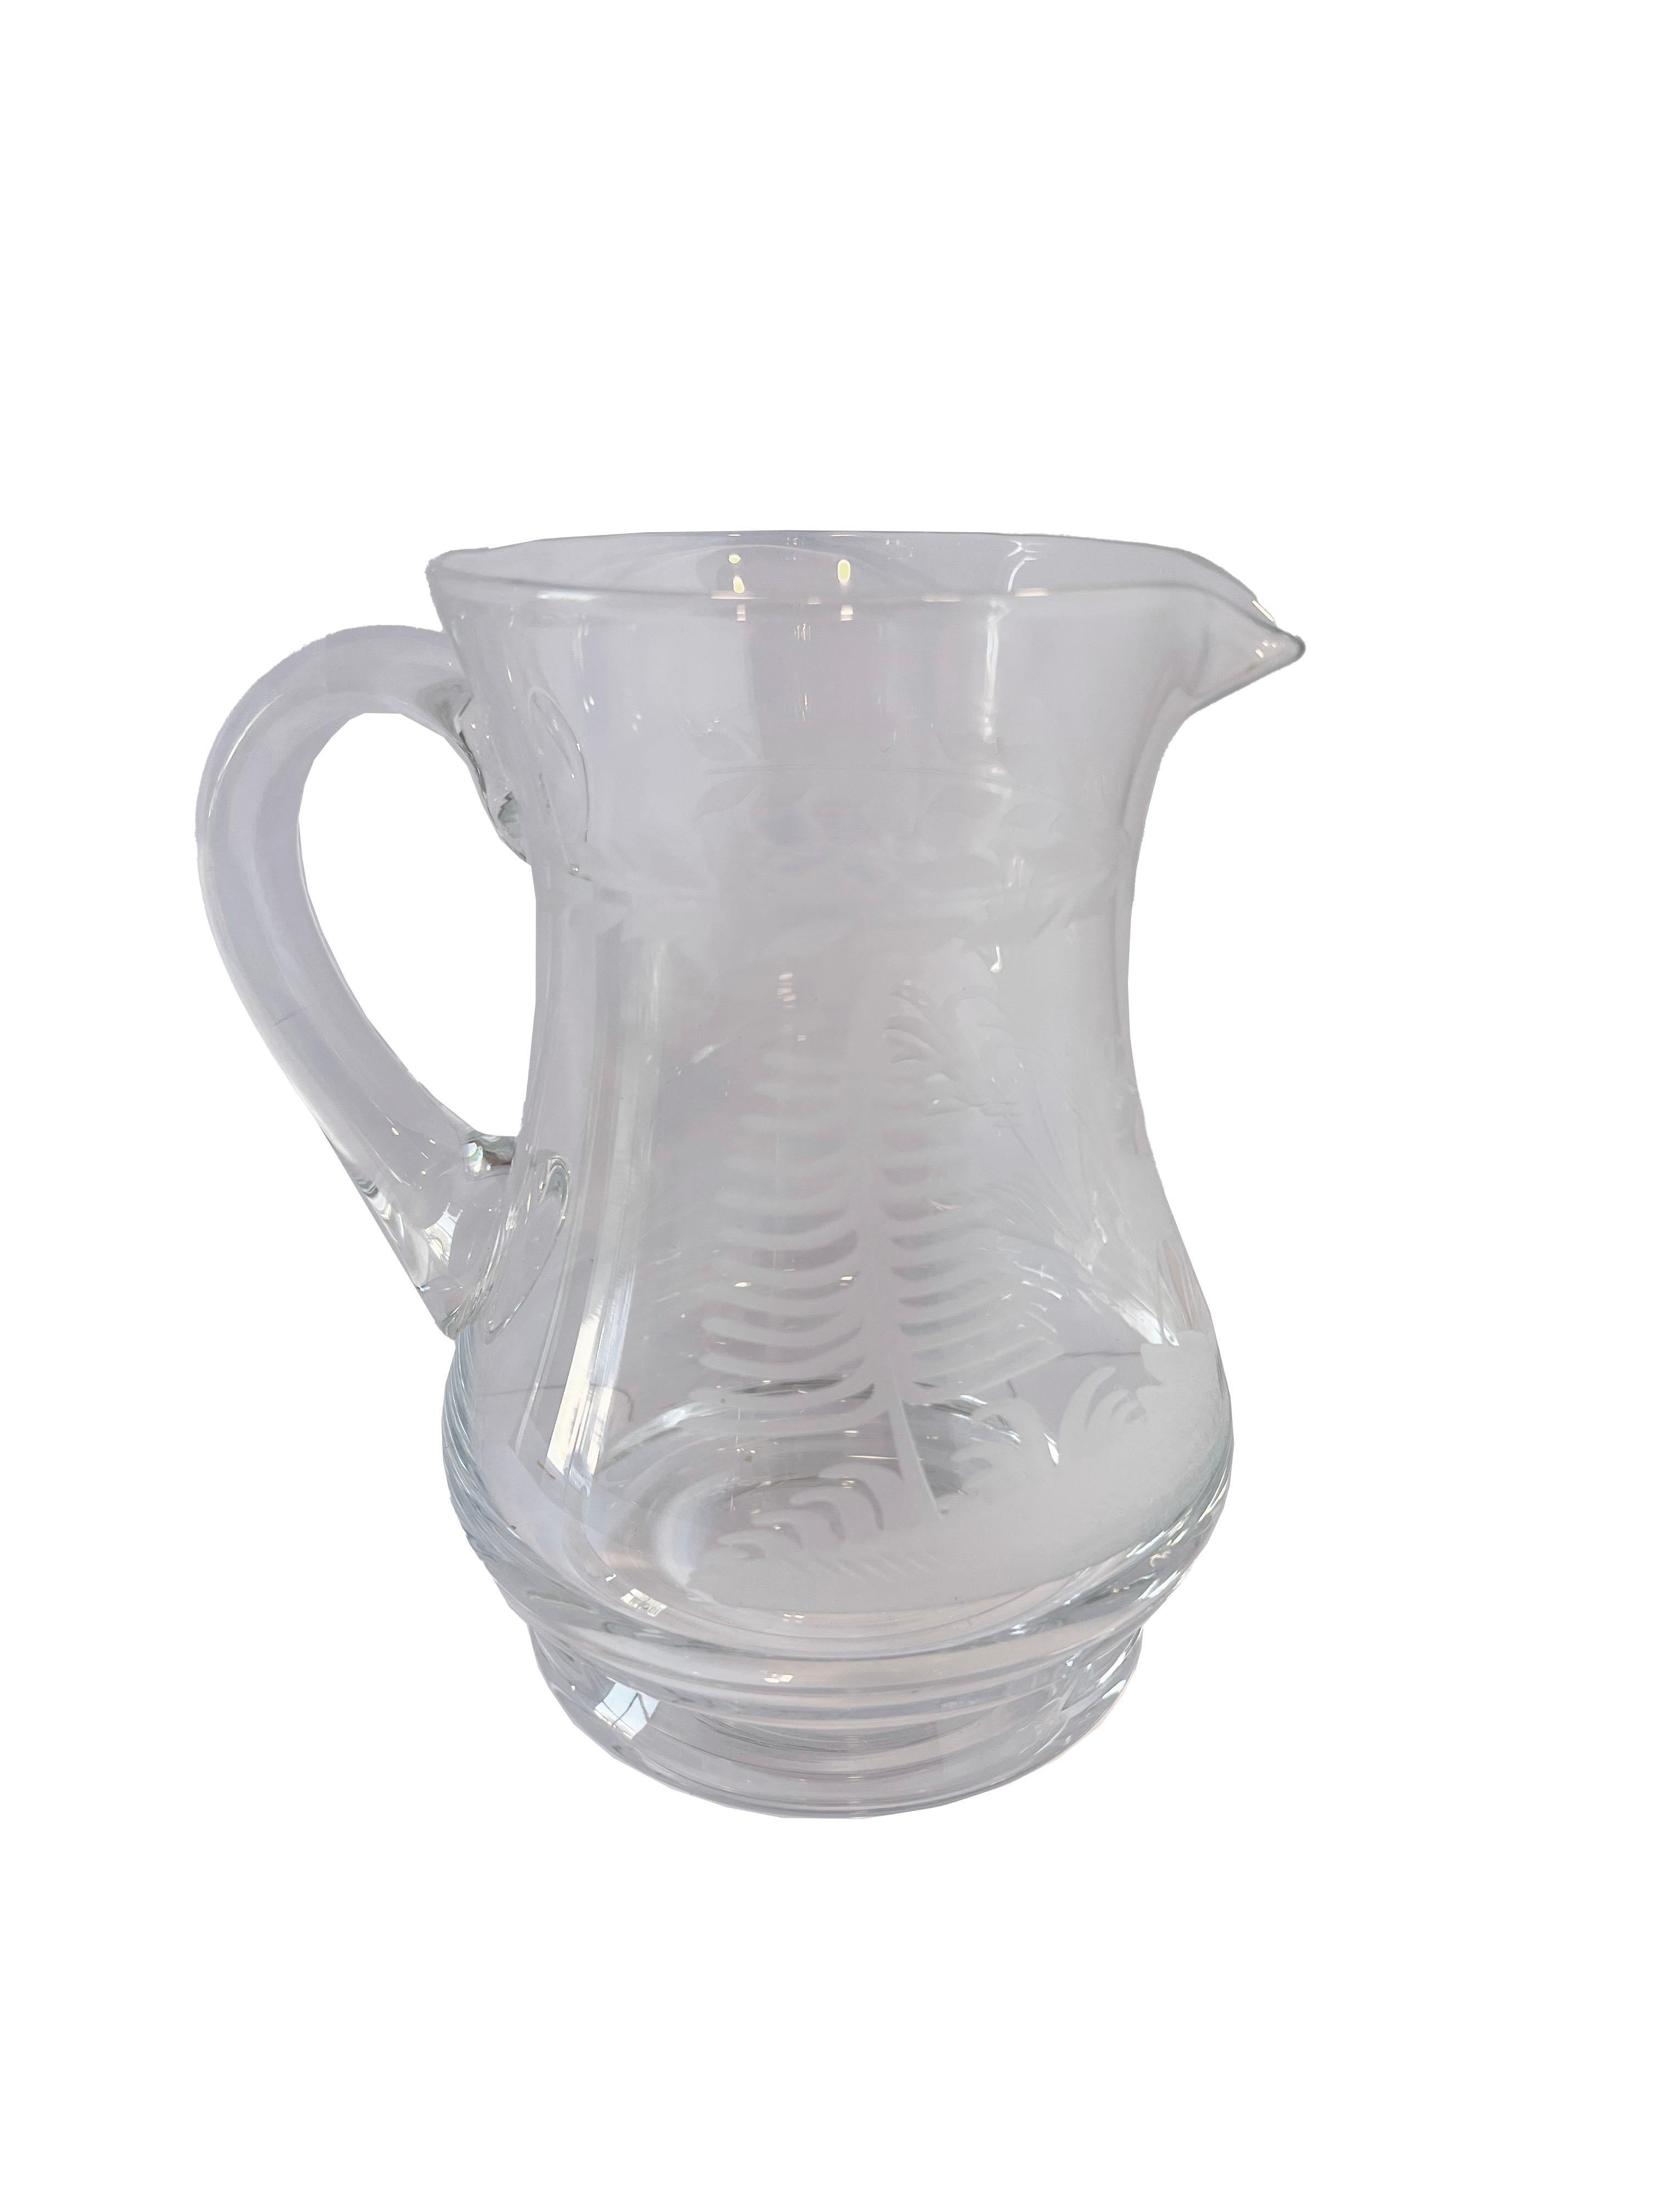 Set of 3 Glass Etched Pitchers from Andre Leon Talley's Private Collection In Good Condition For Sale In Scottsdale, AZ